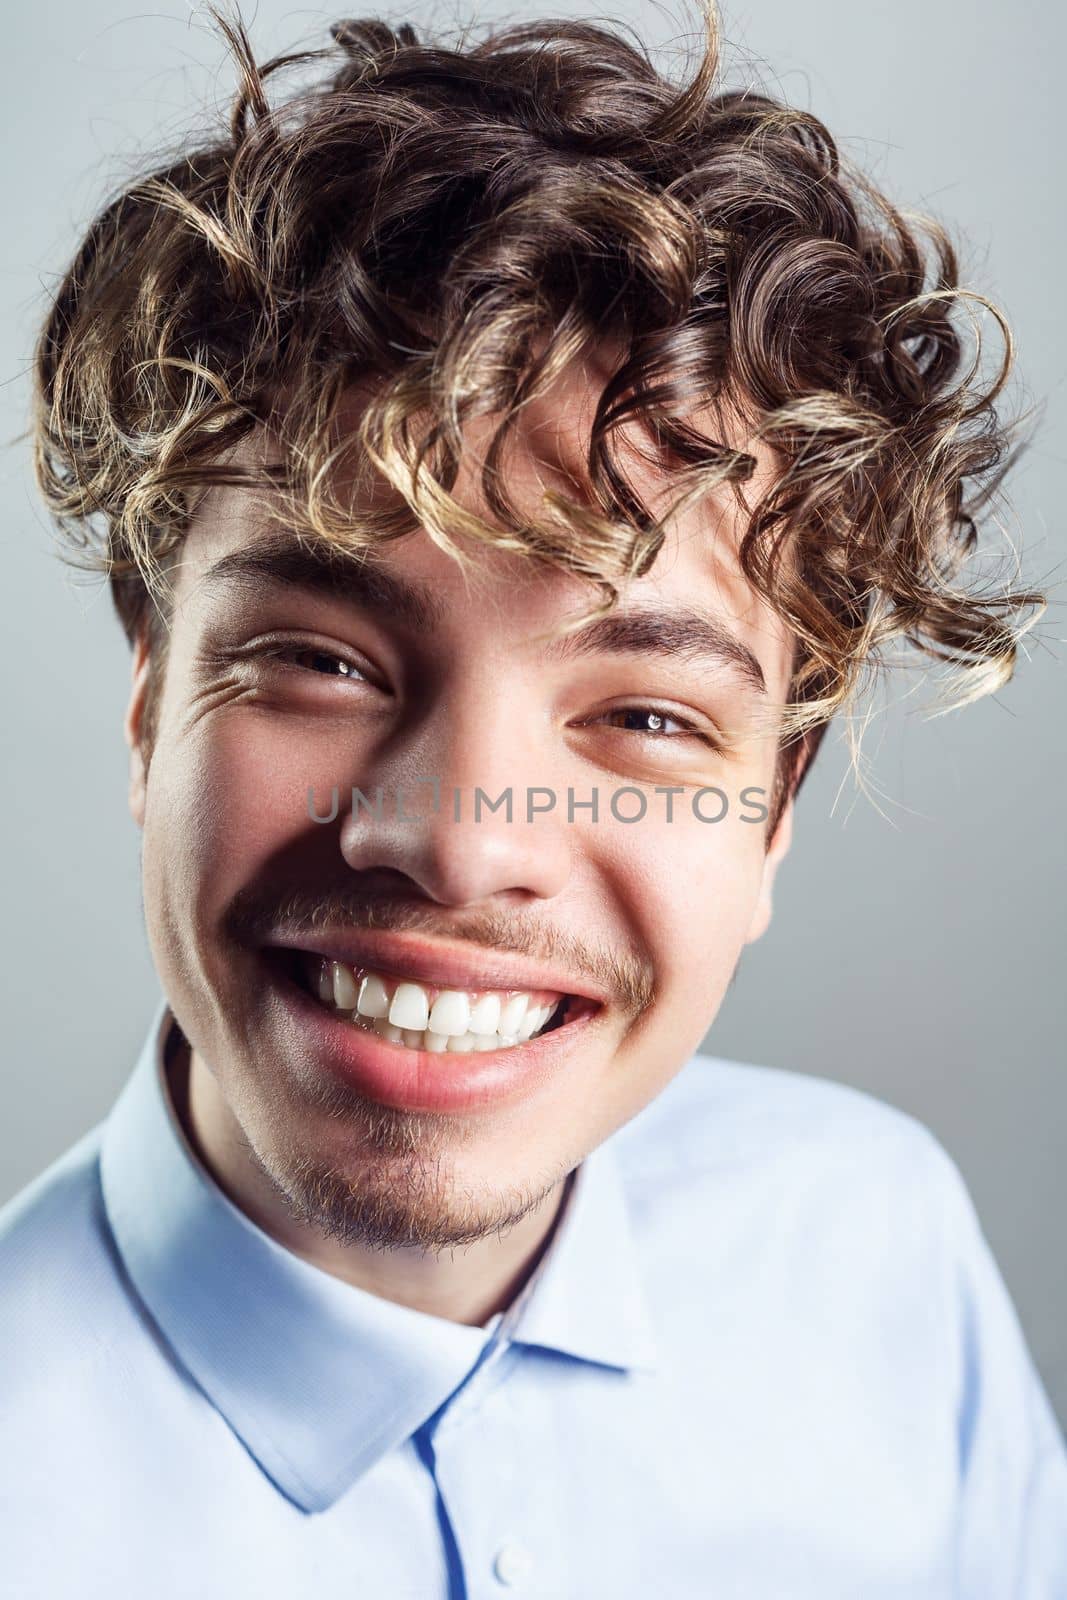 Portrait of happy smiling handsome man with mustache with curly hairstyle, wearing blue shirt, looking at camera, expressing happiness. Indoor studio shot isolated on gray background.